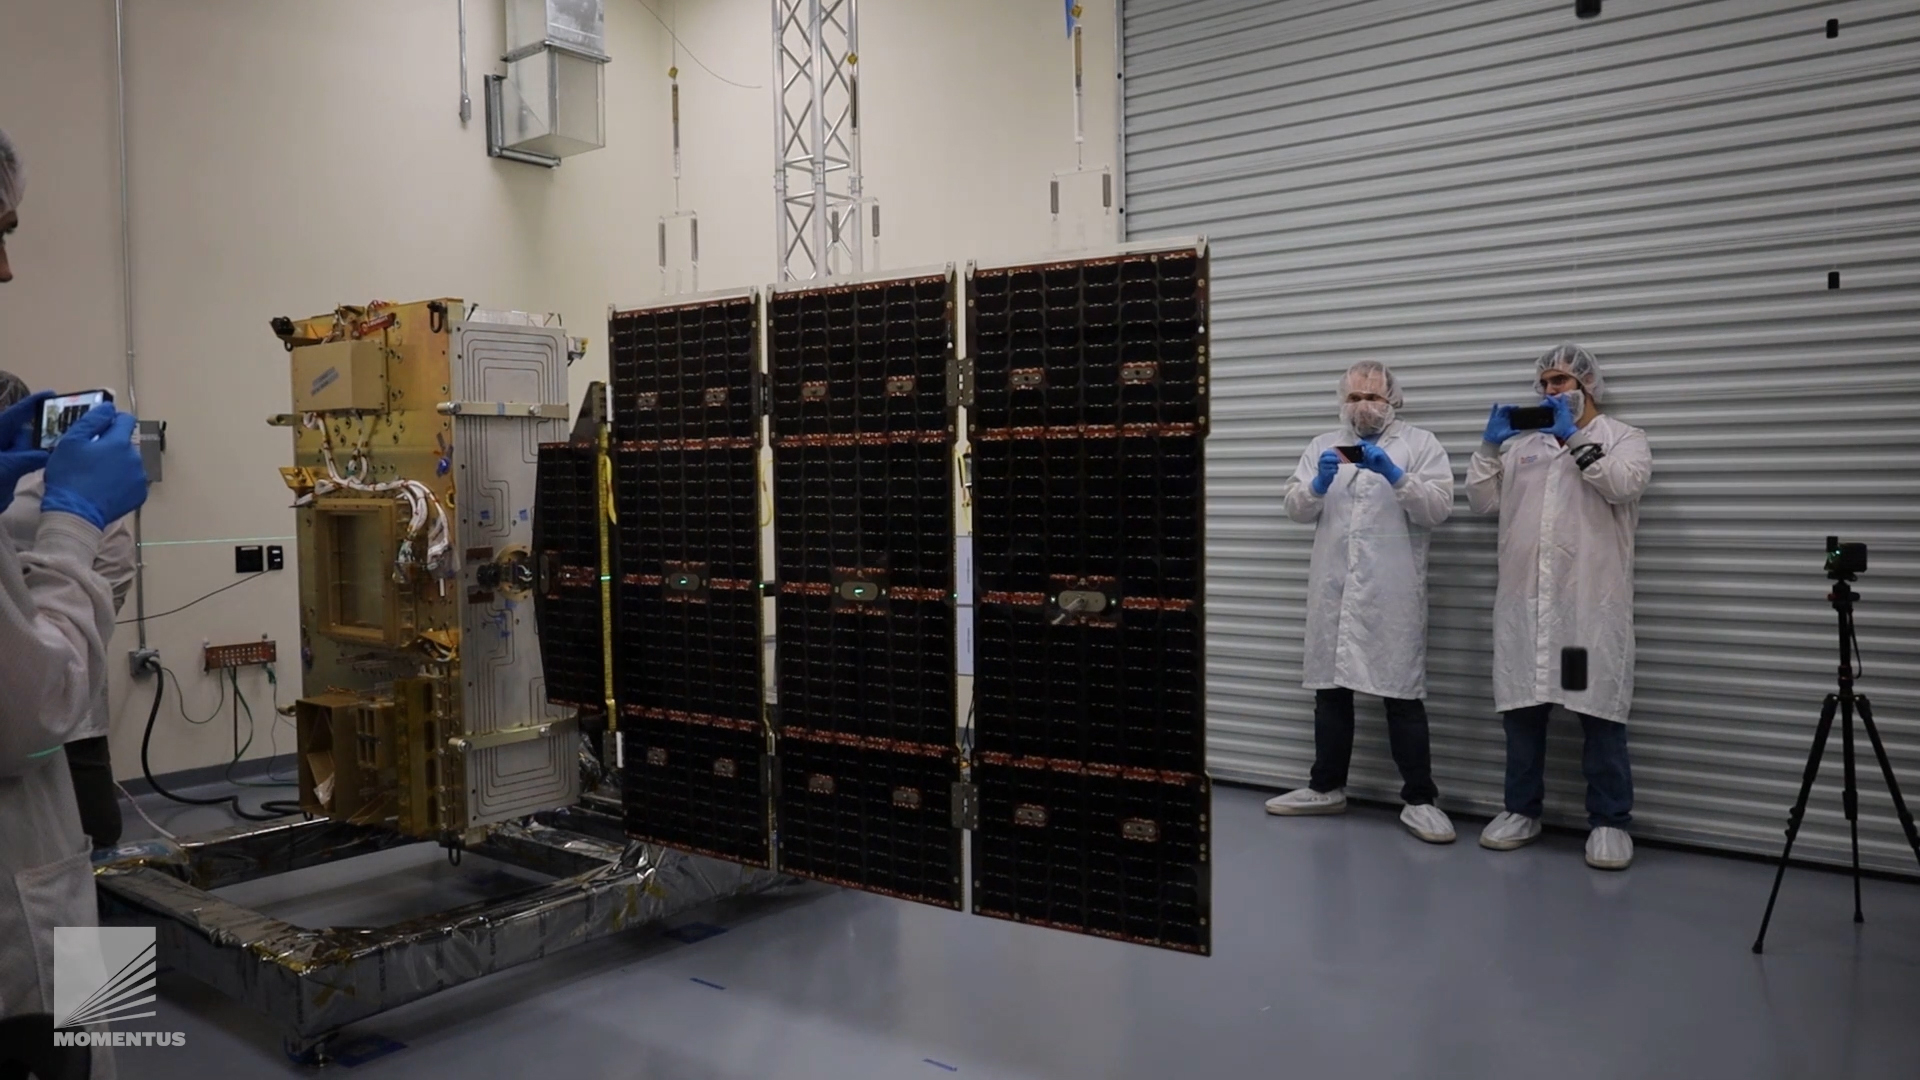 Momentus conducts a solar array deployment test ahead of its December mission.